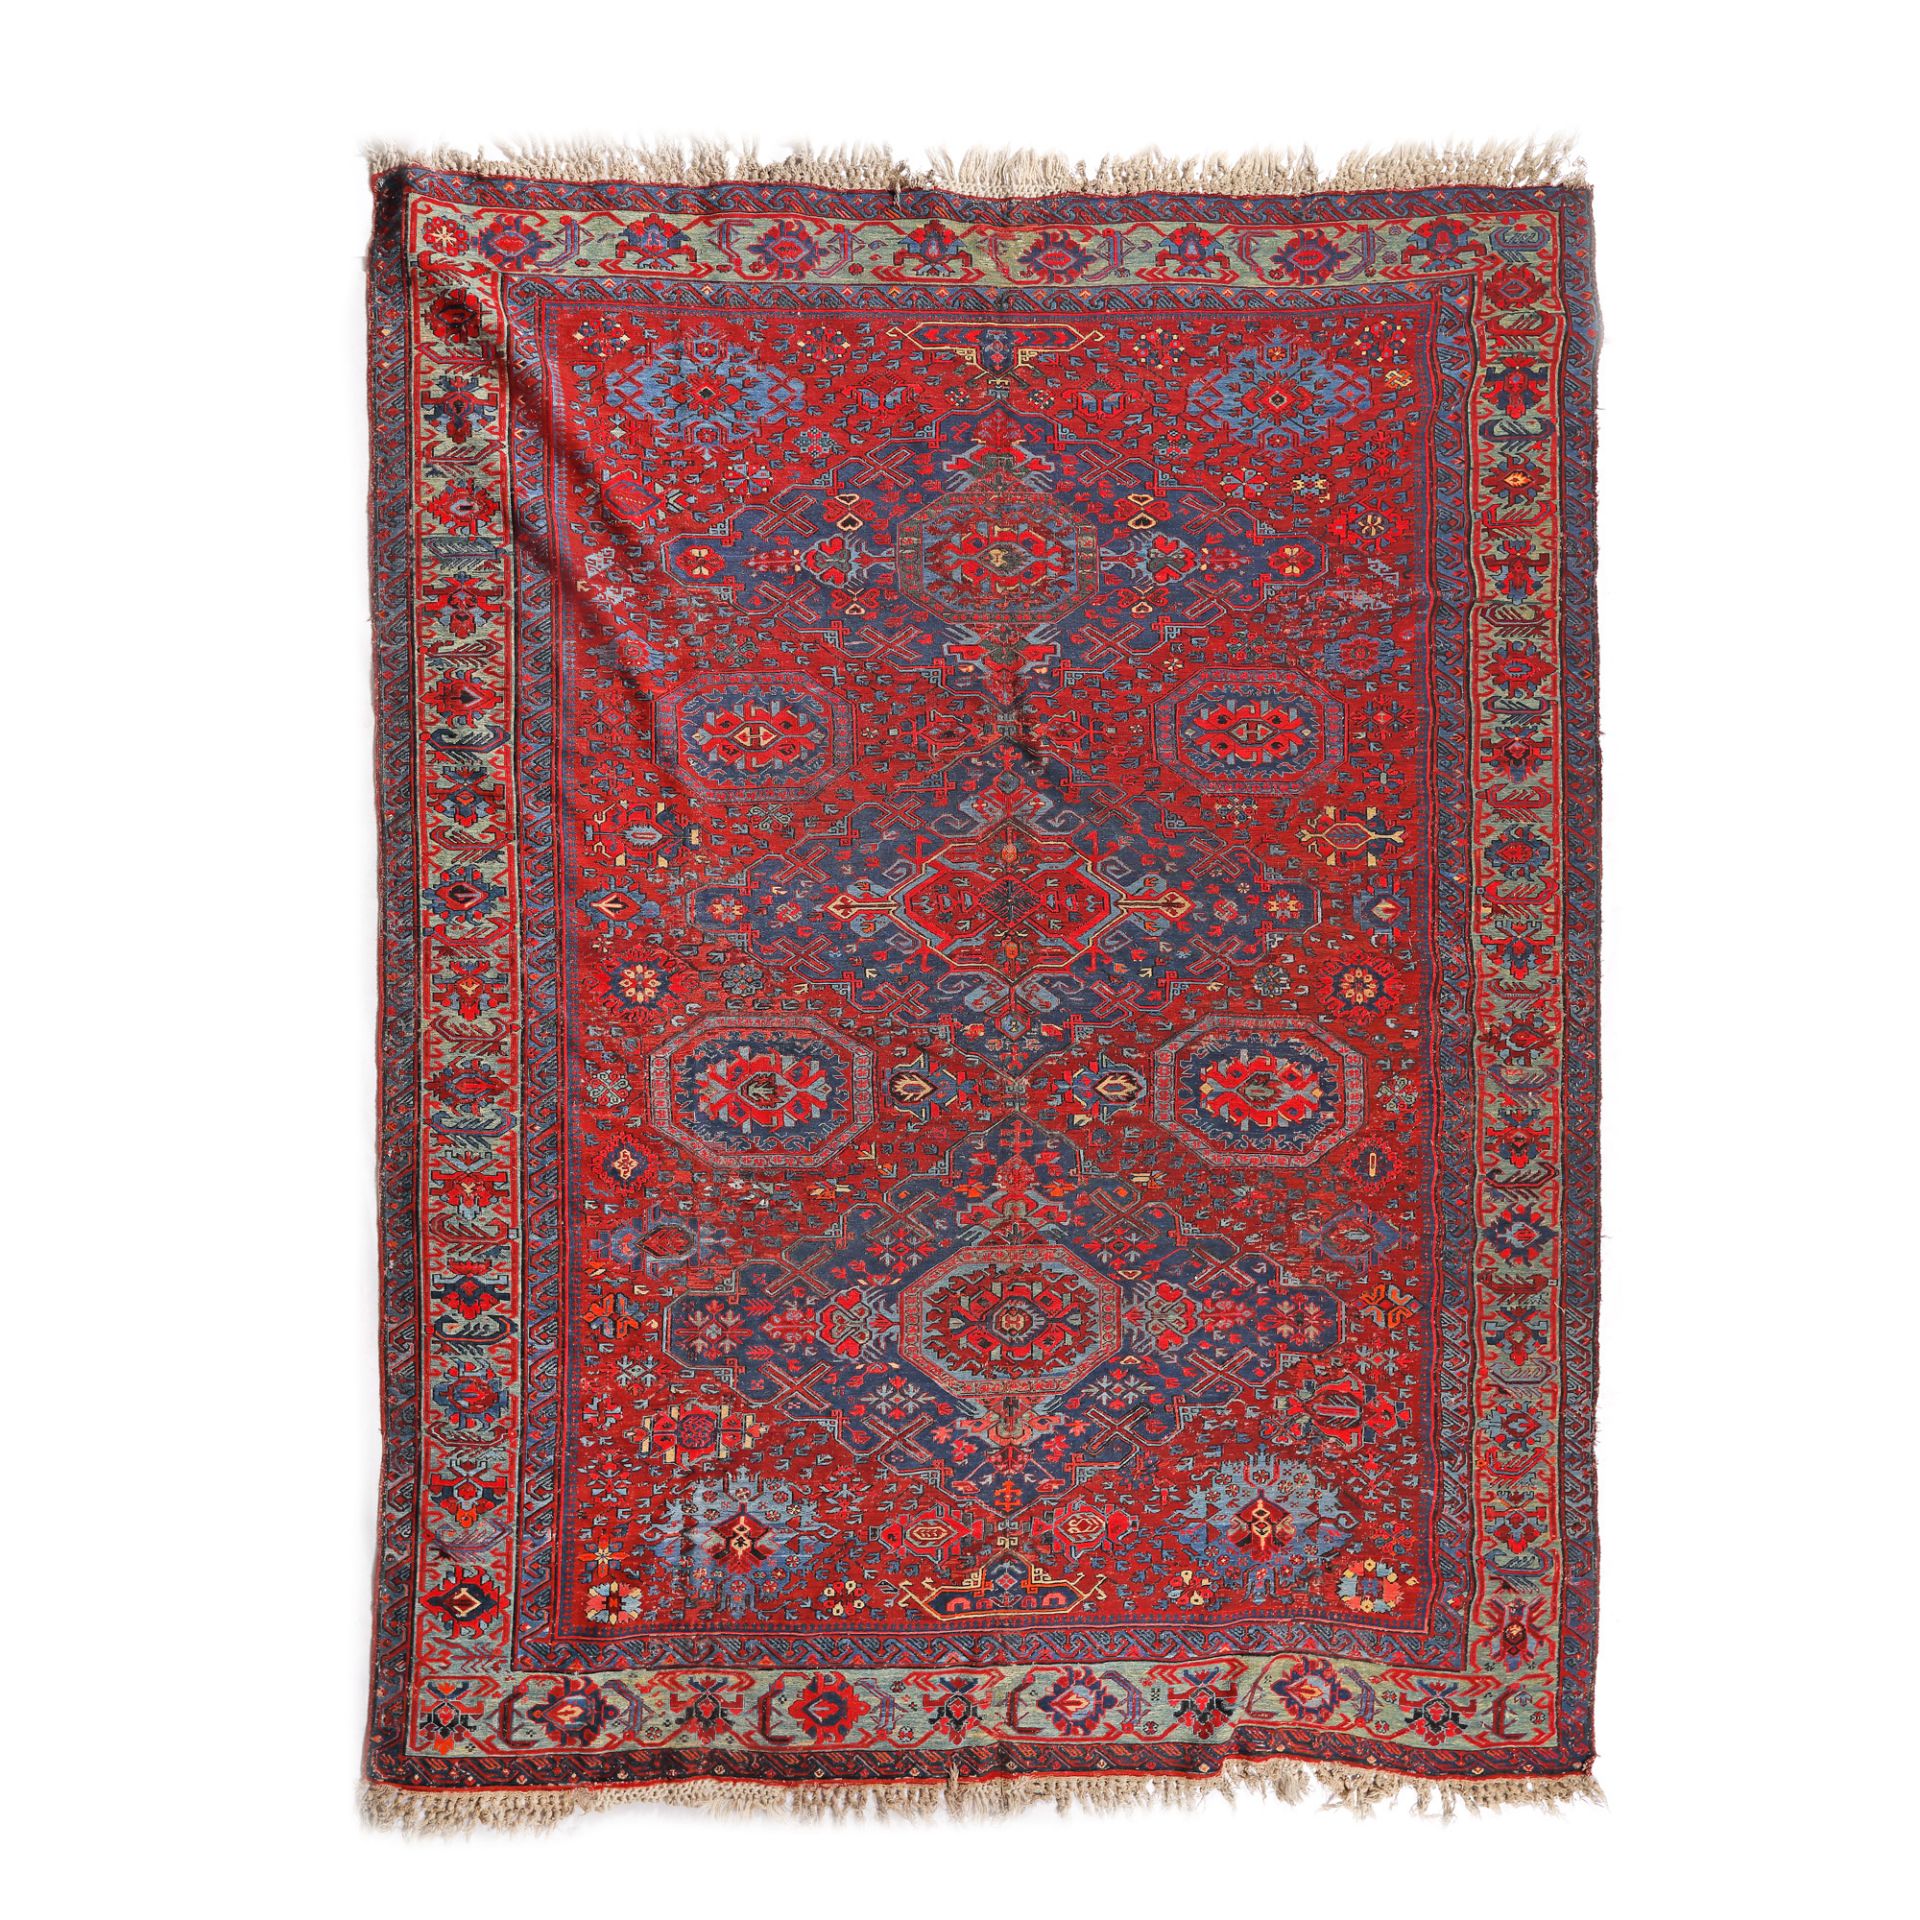 Sumak wool rug, decorated with traditional medallions, Caucasus, second half of the 19th century